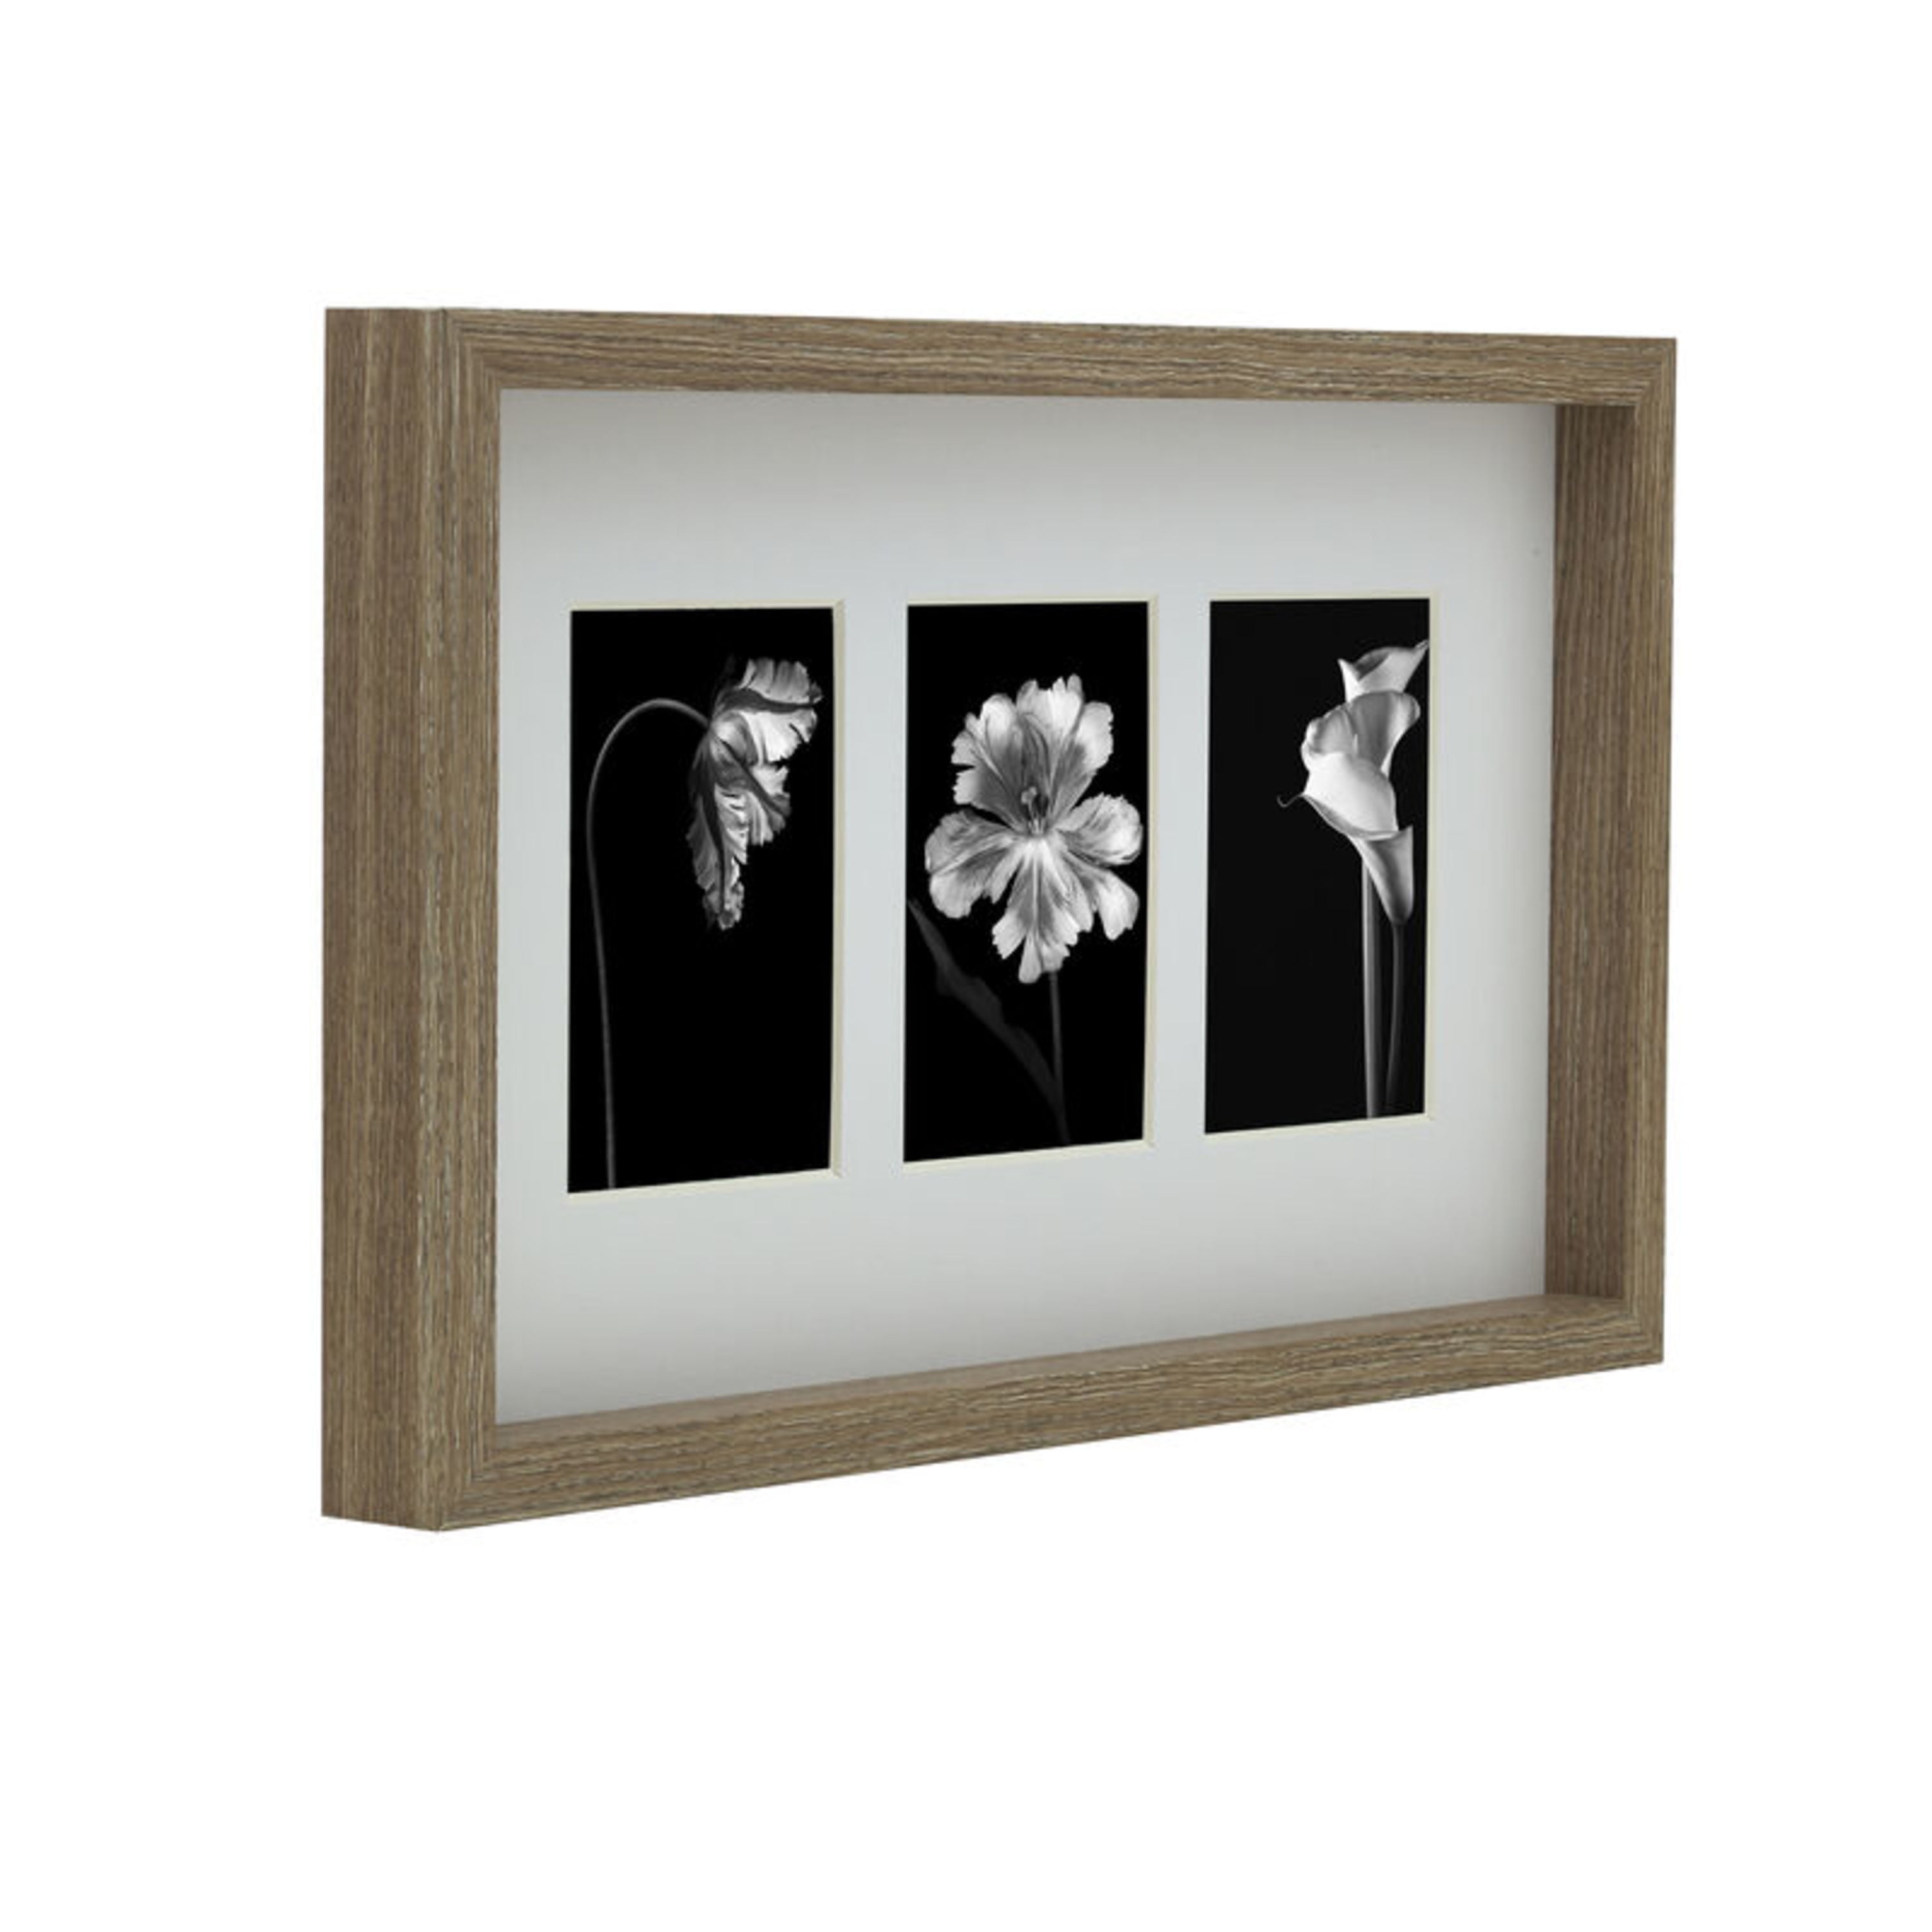 3 4x6 Picture Frame — Mixed Conestoga Collage